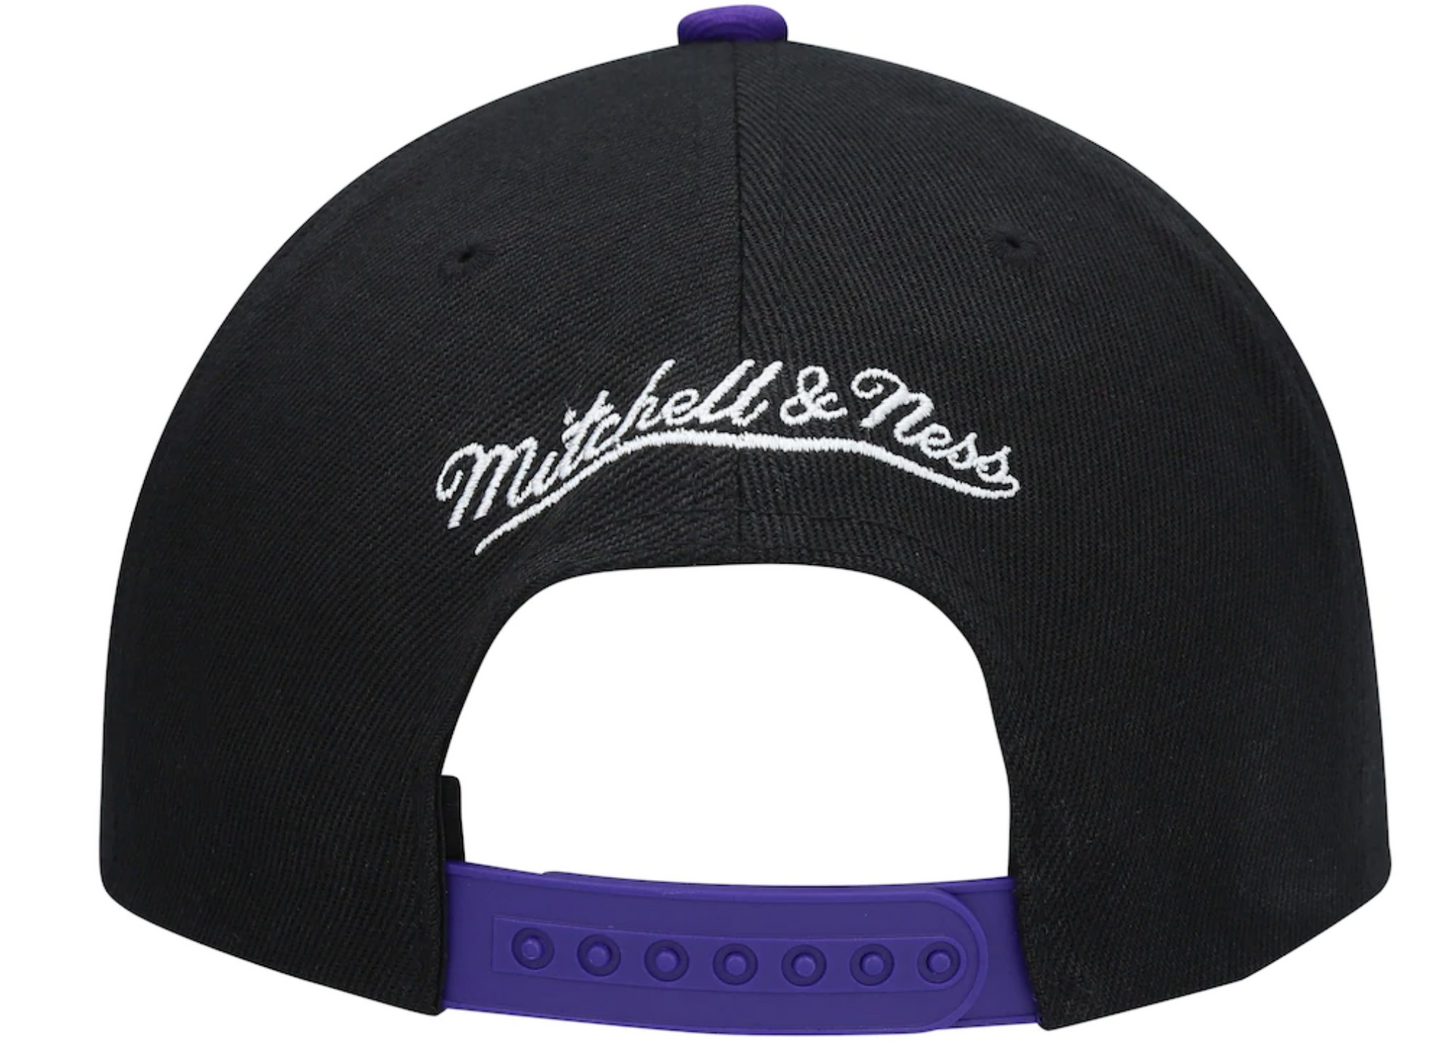 Men's Los Angeles Lakers Mitchell & Ness Black/Purple NBA Patches 2 Tone Snapback Adjustable Hat